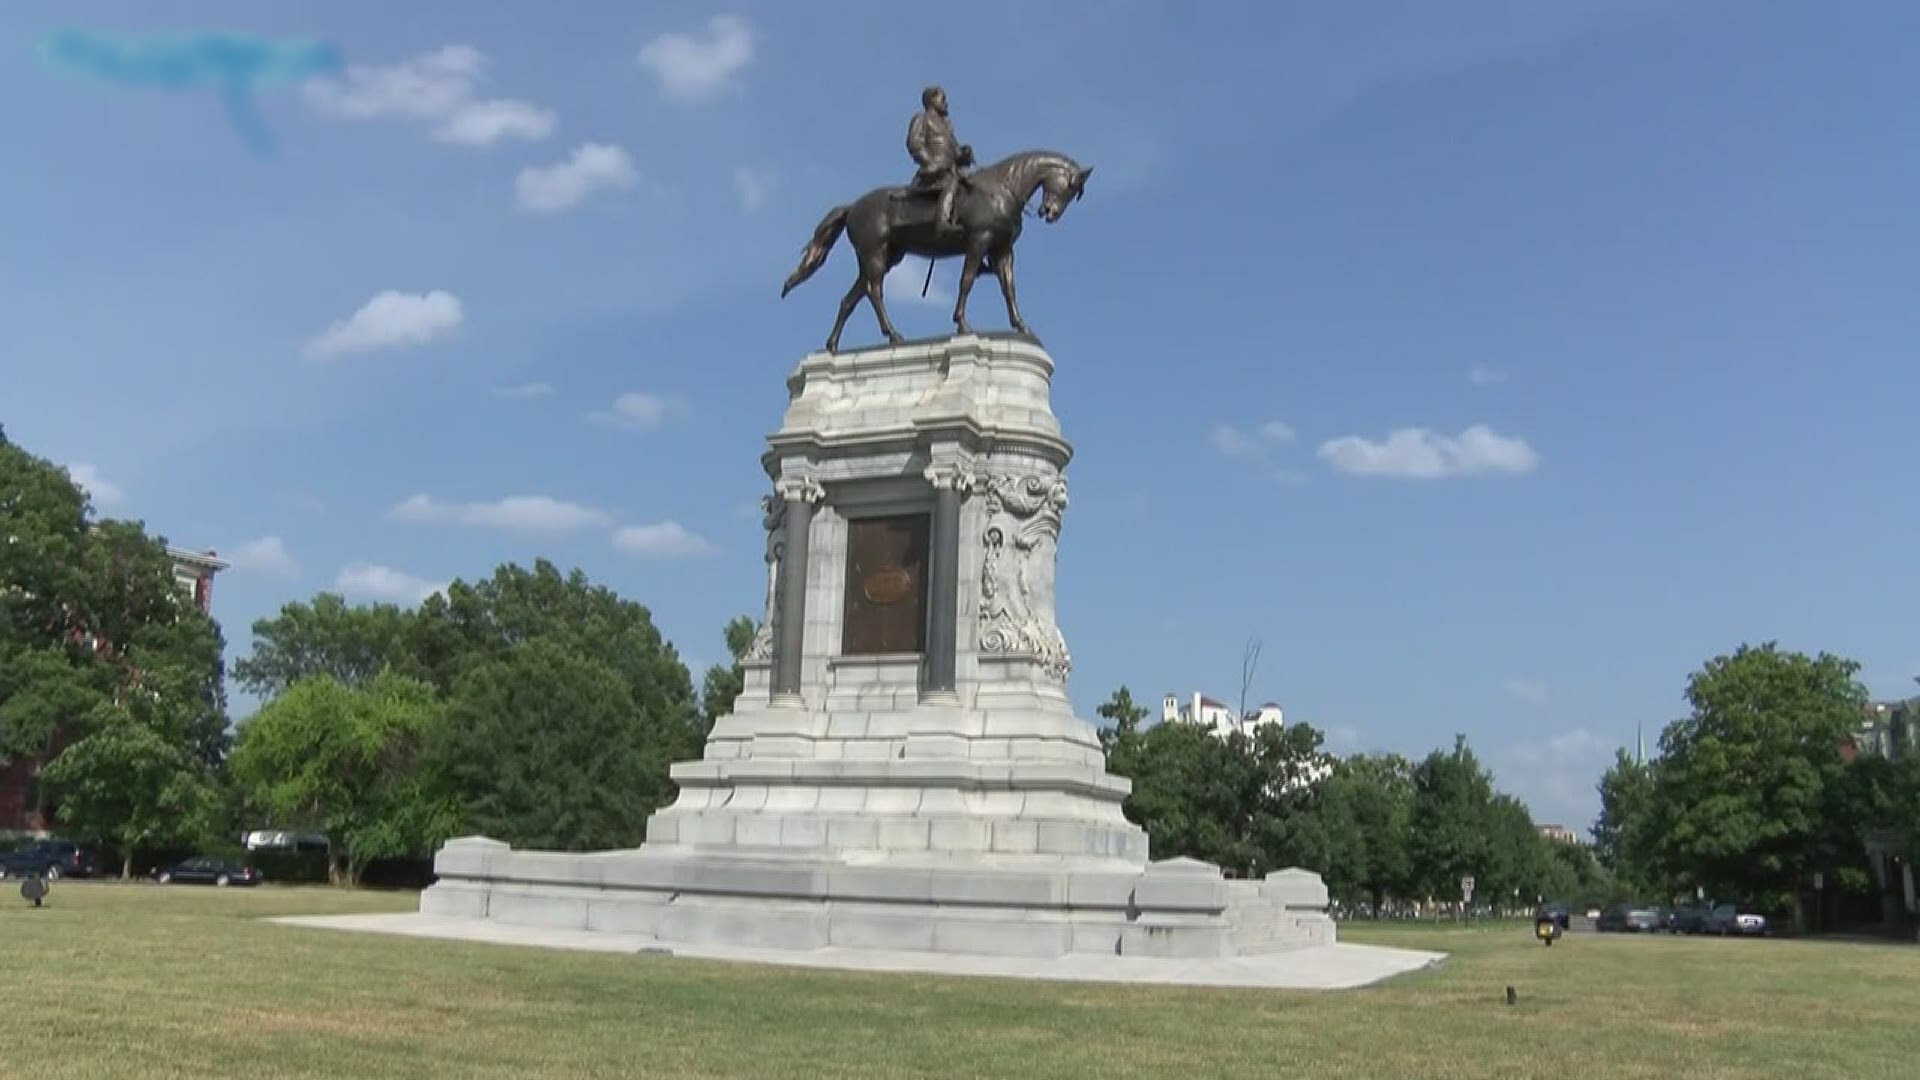 60a Robert E. Lee Monument on his horse Traveller